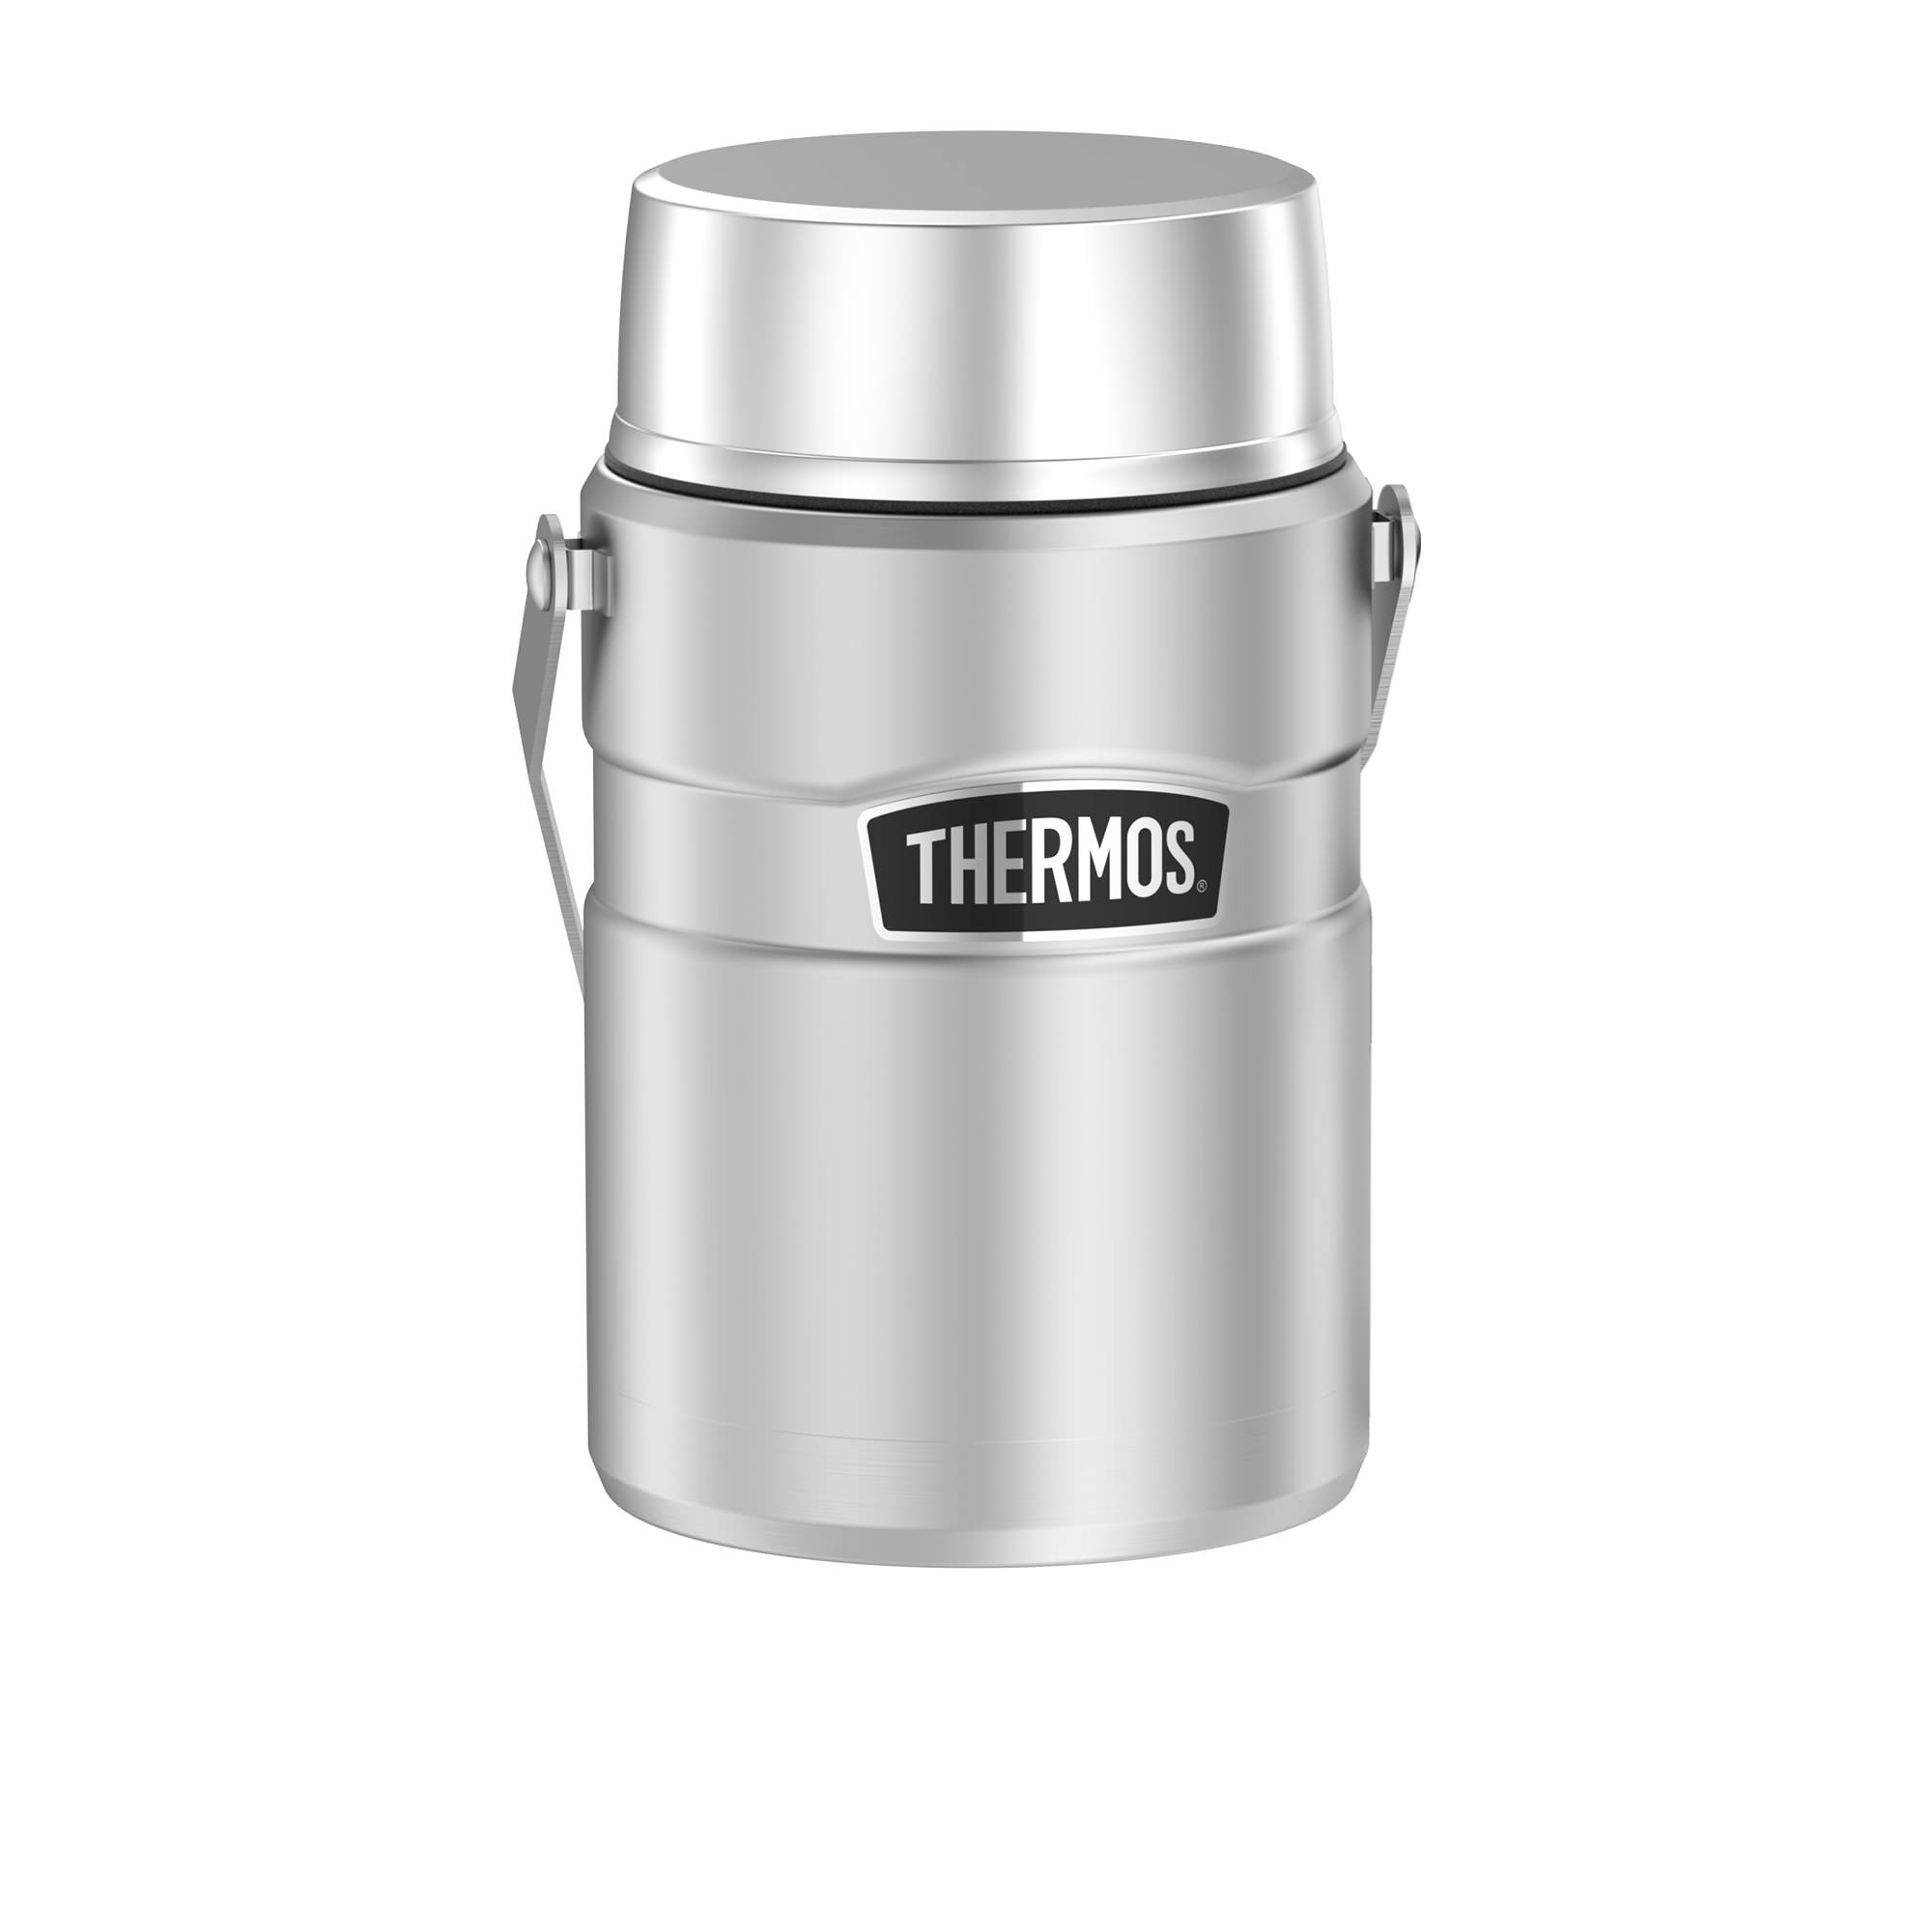 Thermos Stainless King Big Boss Food Jar 1.39L Stainless Steel Image 2